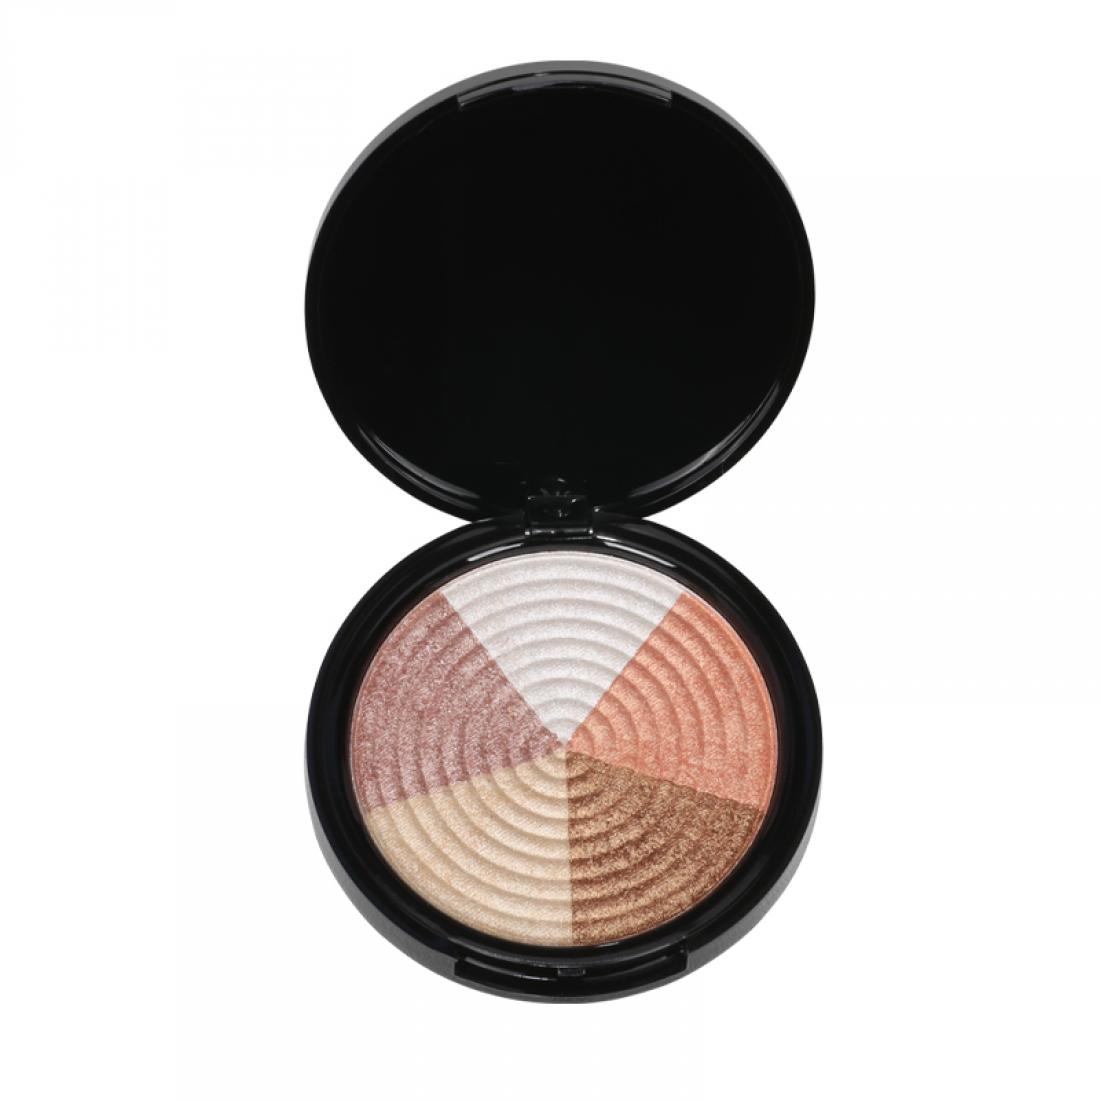 Bolver PEARL Highlighter - 6 colors 705